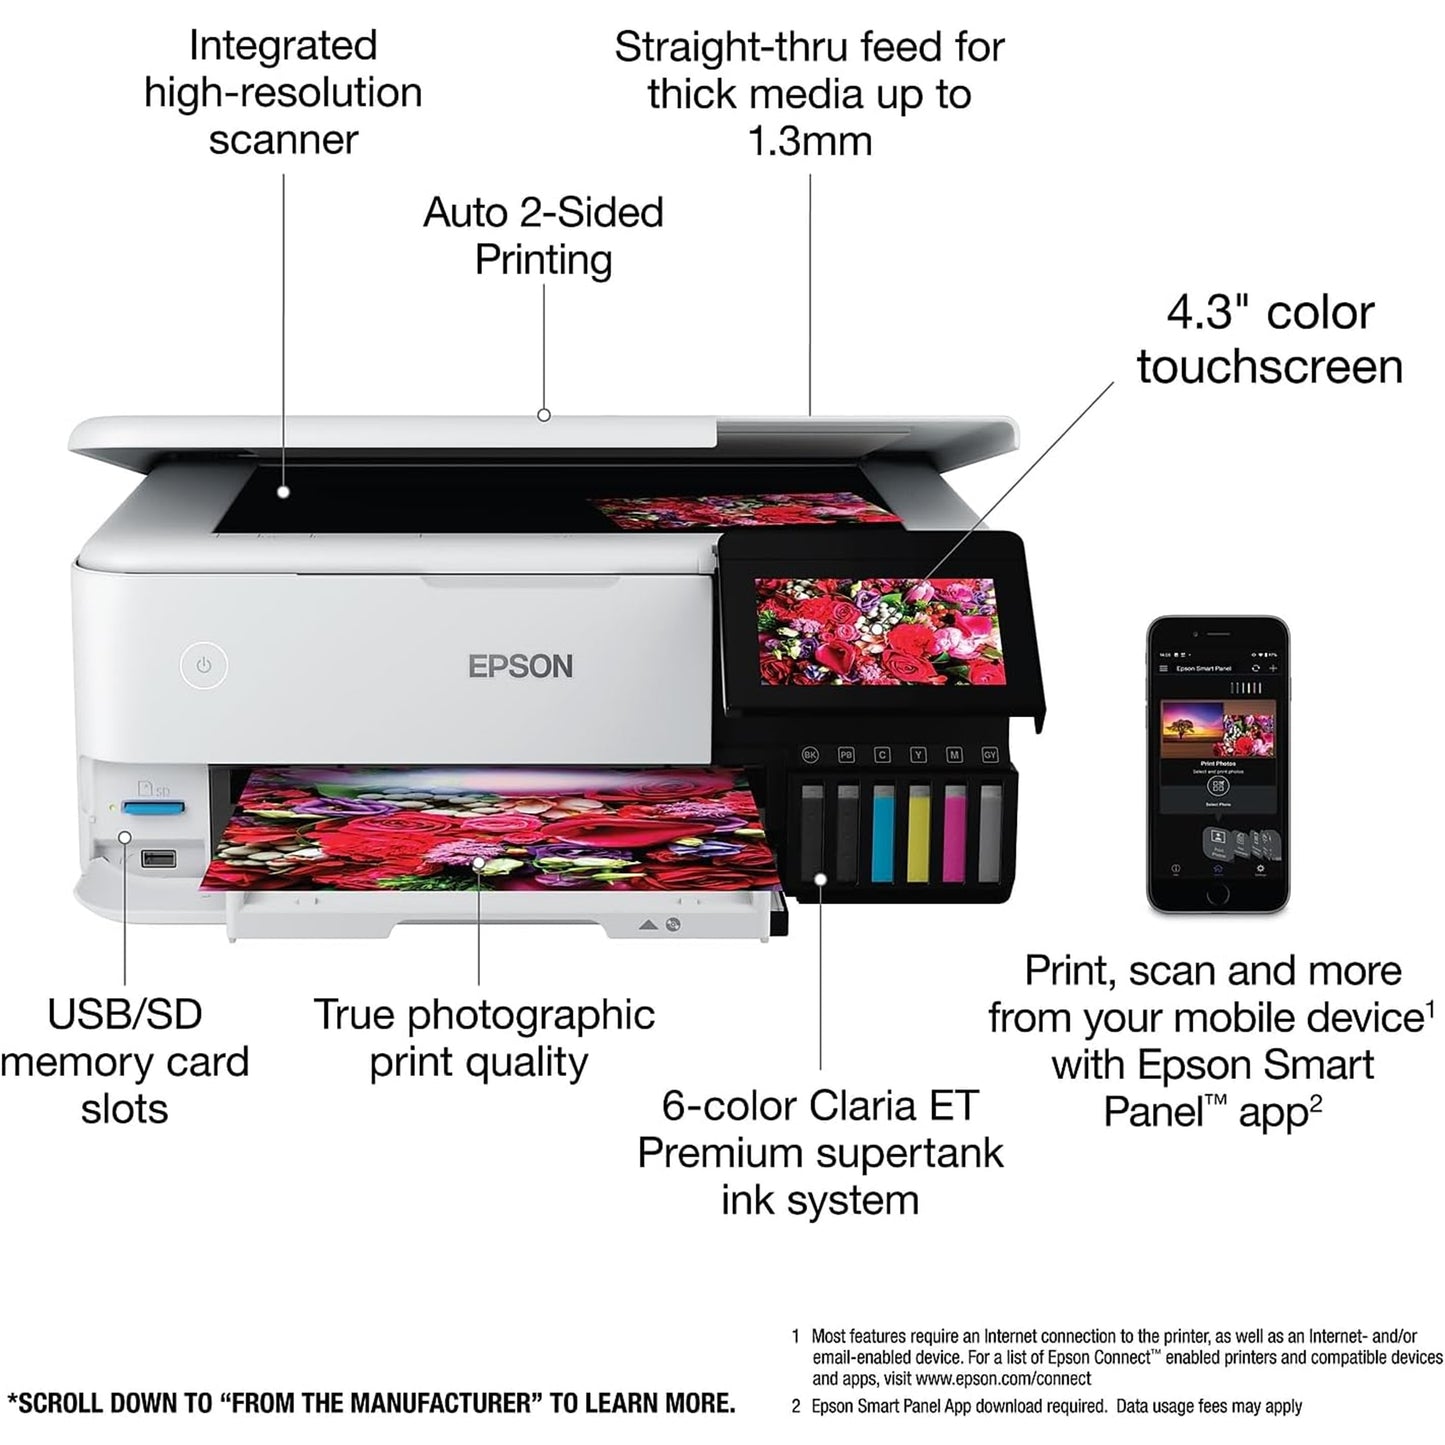 Epson EcoTank Photo ET-8500 Wireless Color All-in-One Supertank Printer with Scanner, Copier, Ethernet and 4.3-inch Color Touchscreen, White, Large